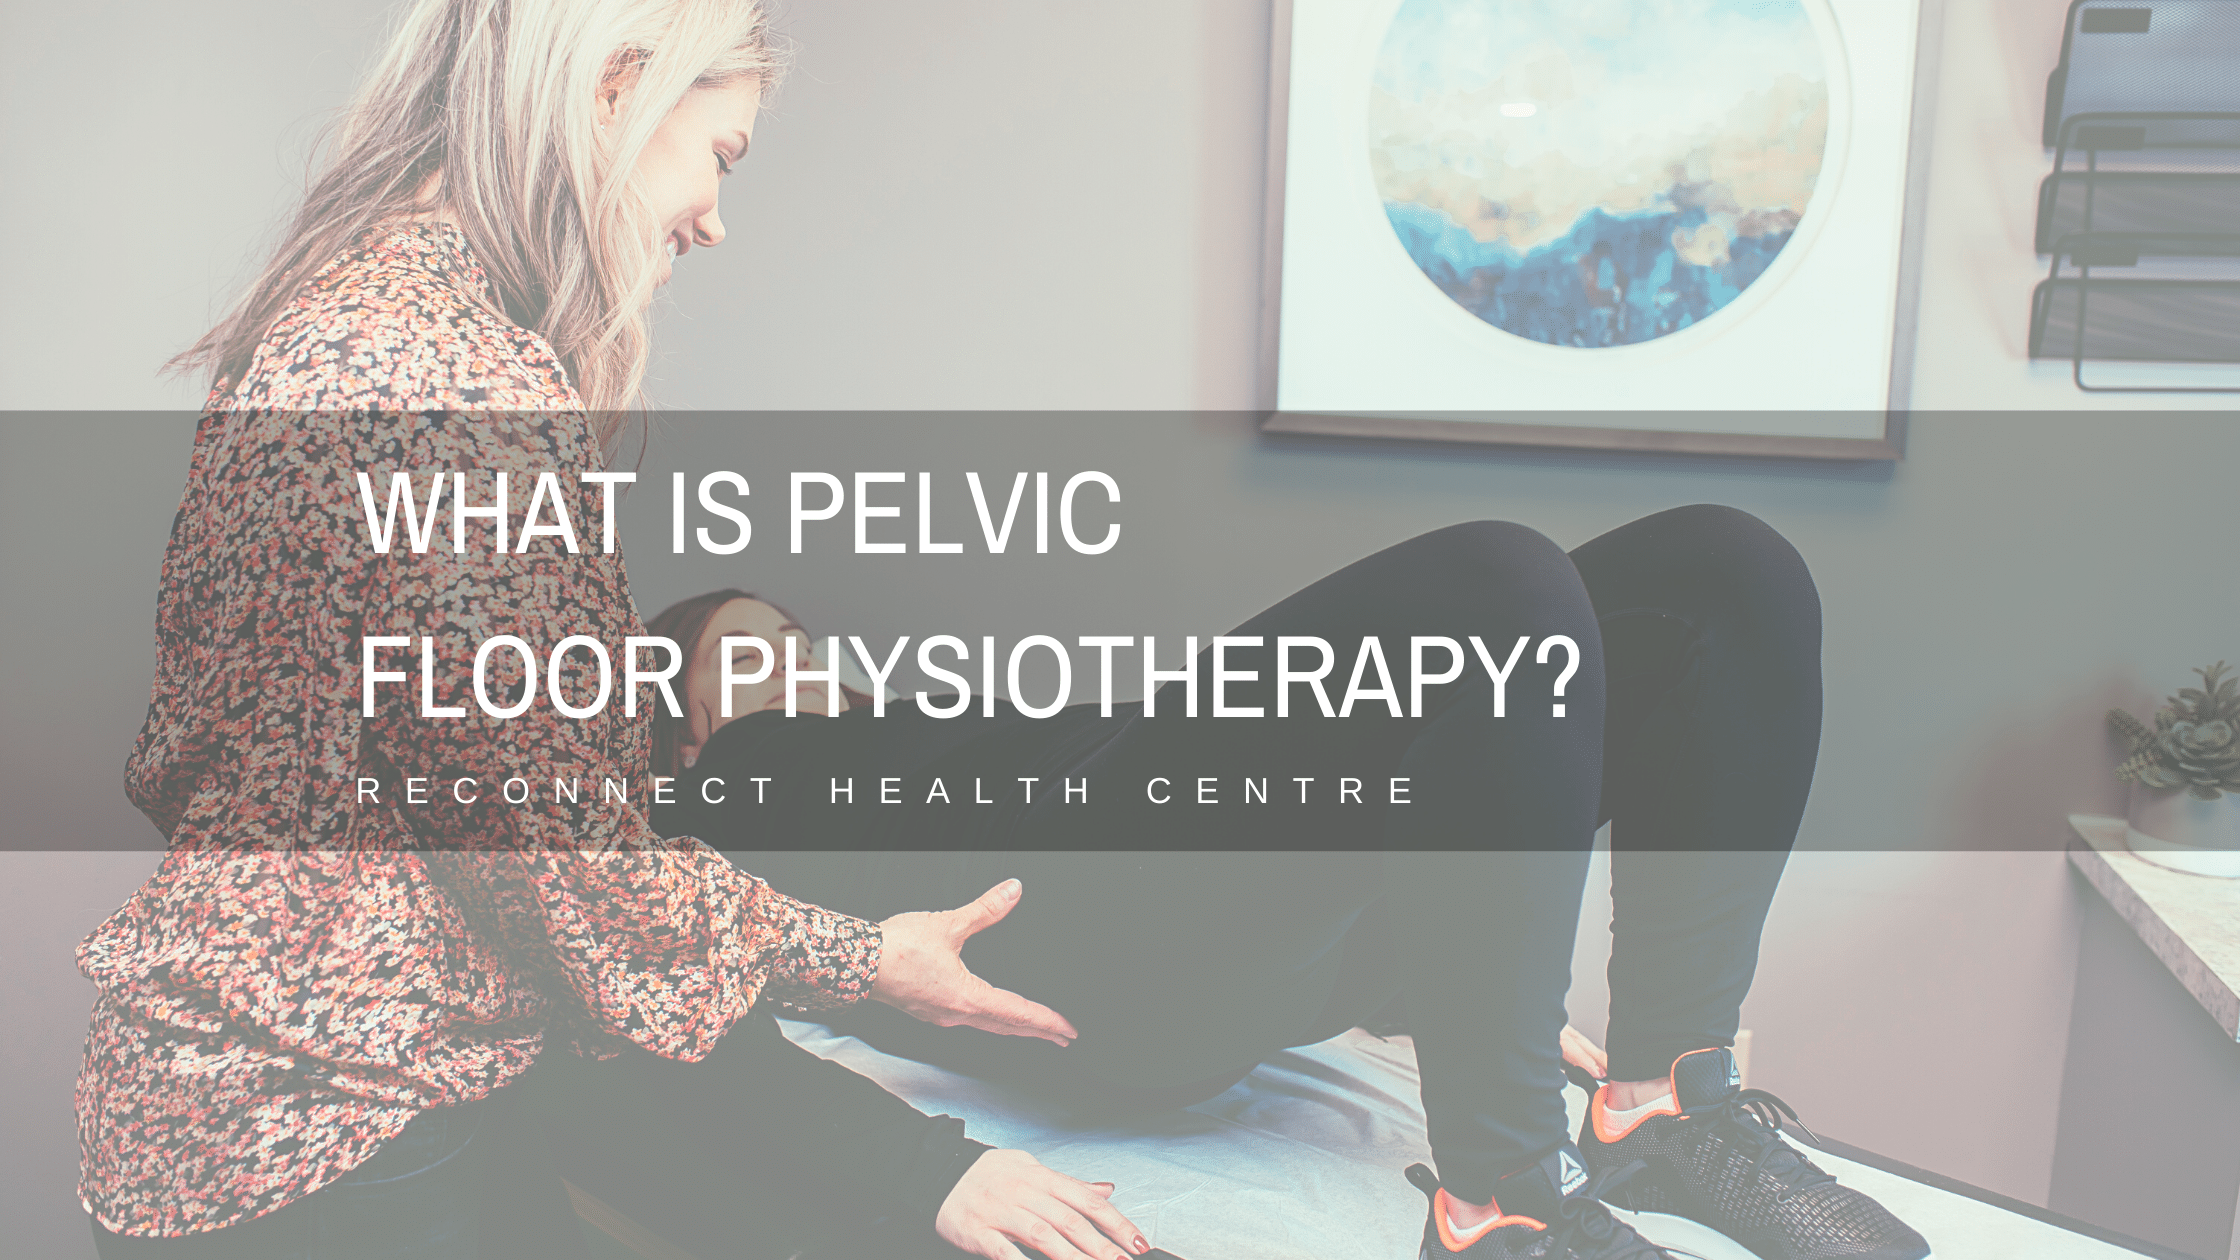 What is pelvic floor physiotherapy?